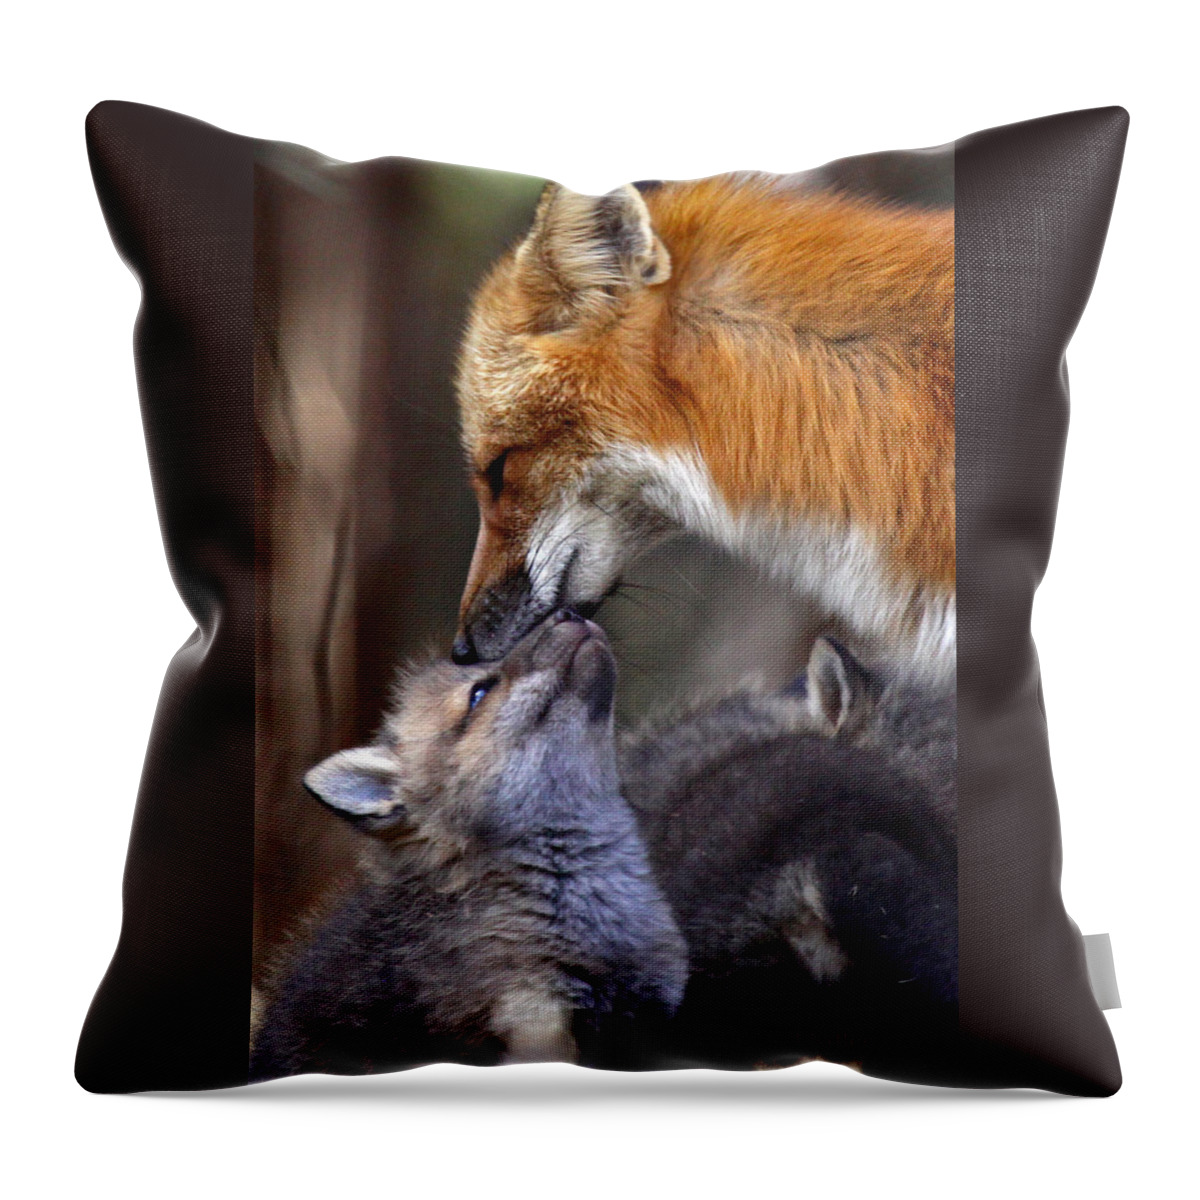 Maine Wildlife Throw Pillow featuring the photograph A Mothers Love by Sharon Fiedler